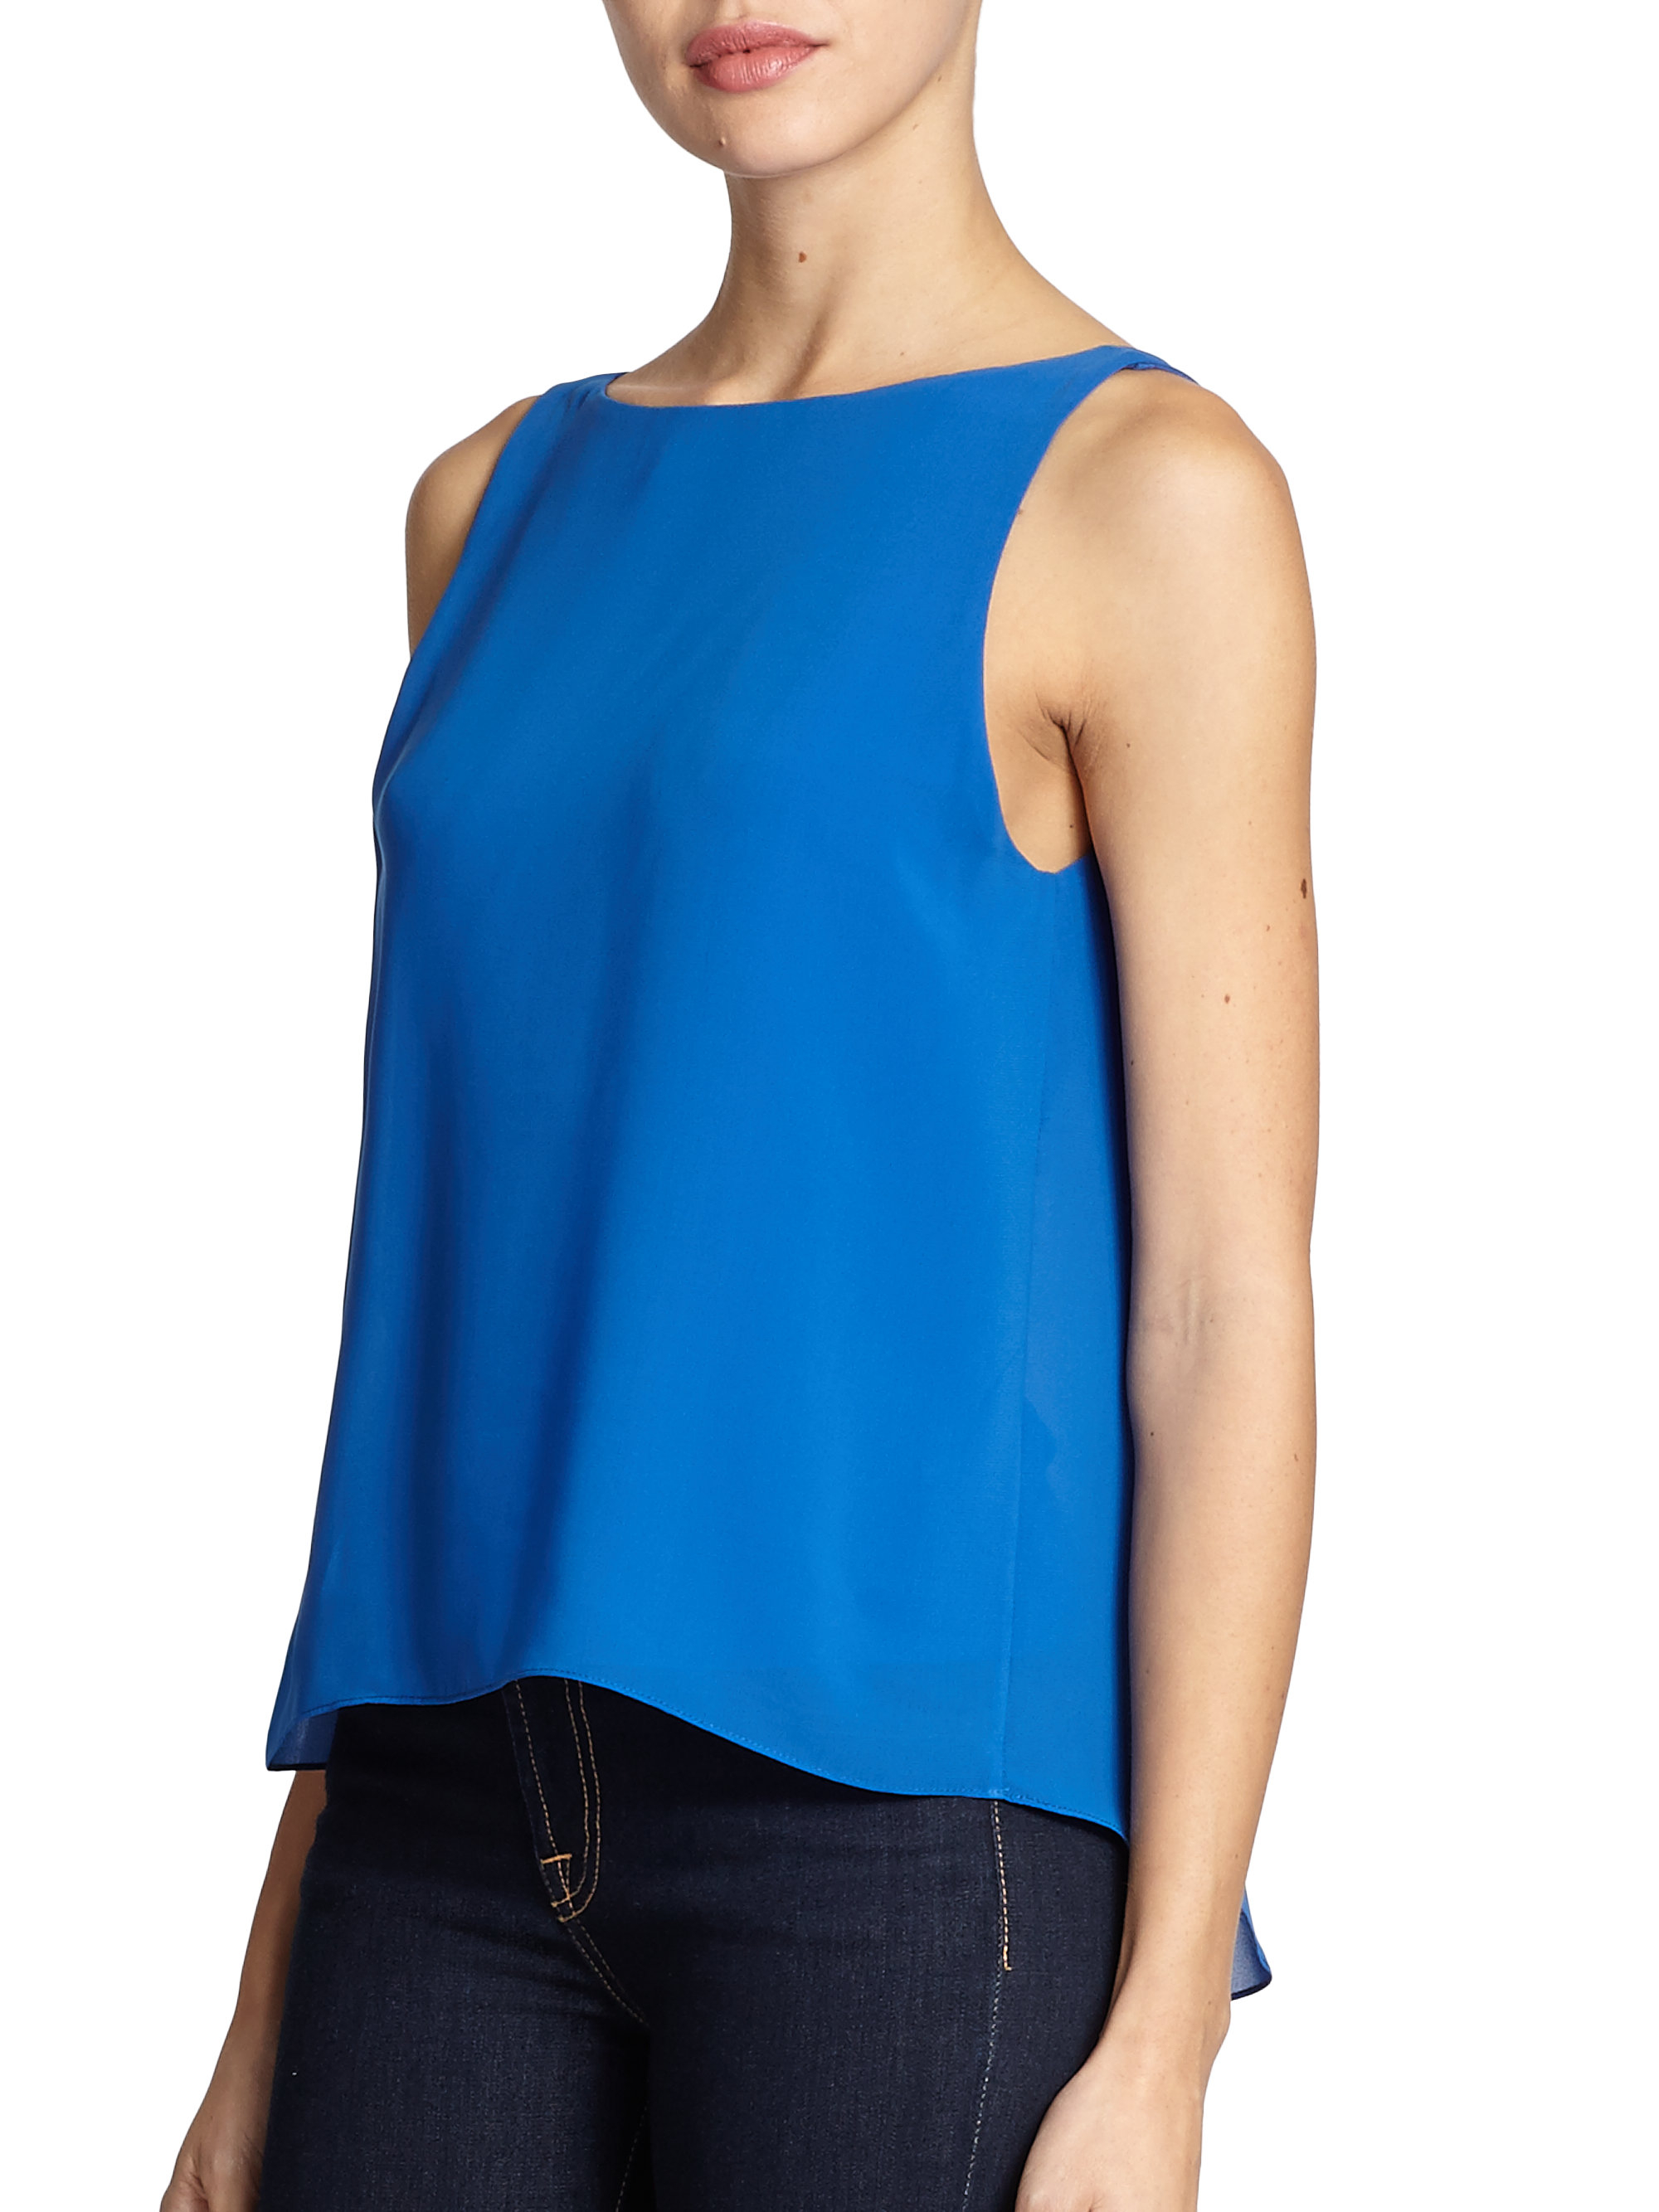 Lyst - Alice + olivia Pleated V-back Top in Blue